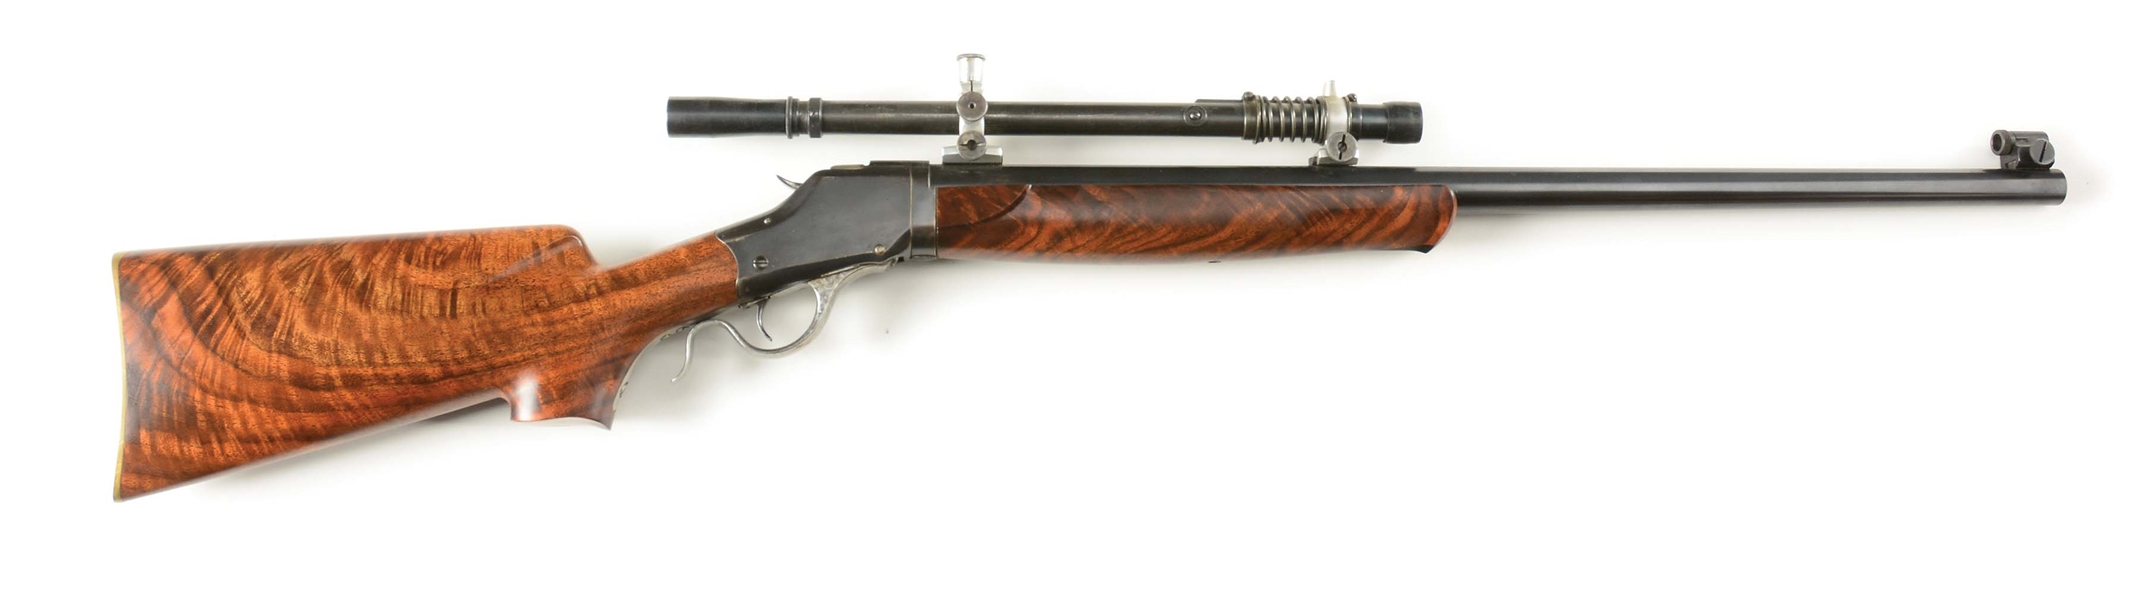 (C) WINCHESTER THICK SIDE HI-WALL TAKEDOWN CUSTOM SINGLE SHOT RIFLE WITH SCOPE.